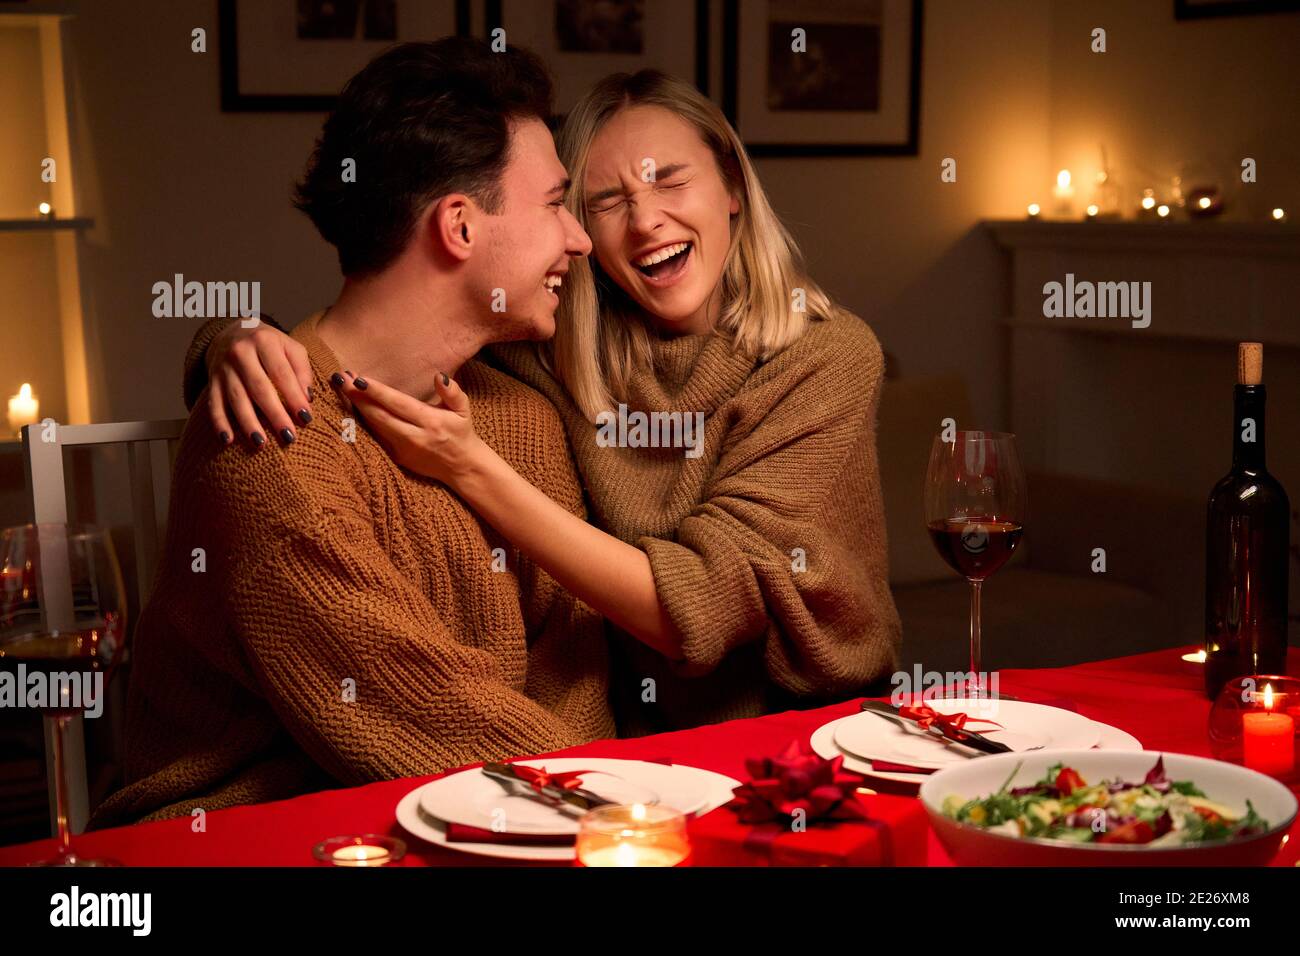 Happy young couple hugging laughing celebrating Valentines day together at home. Stock Photo